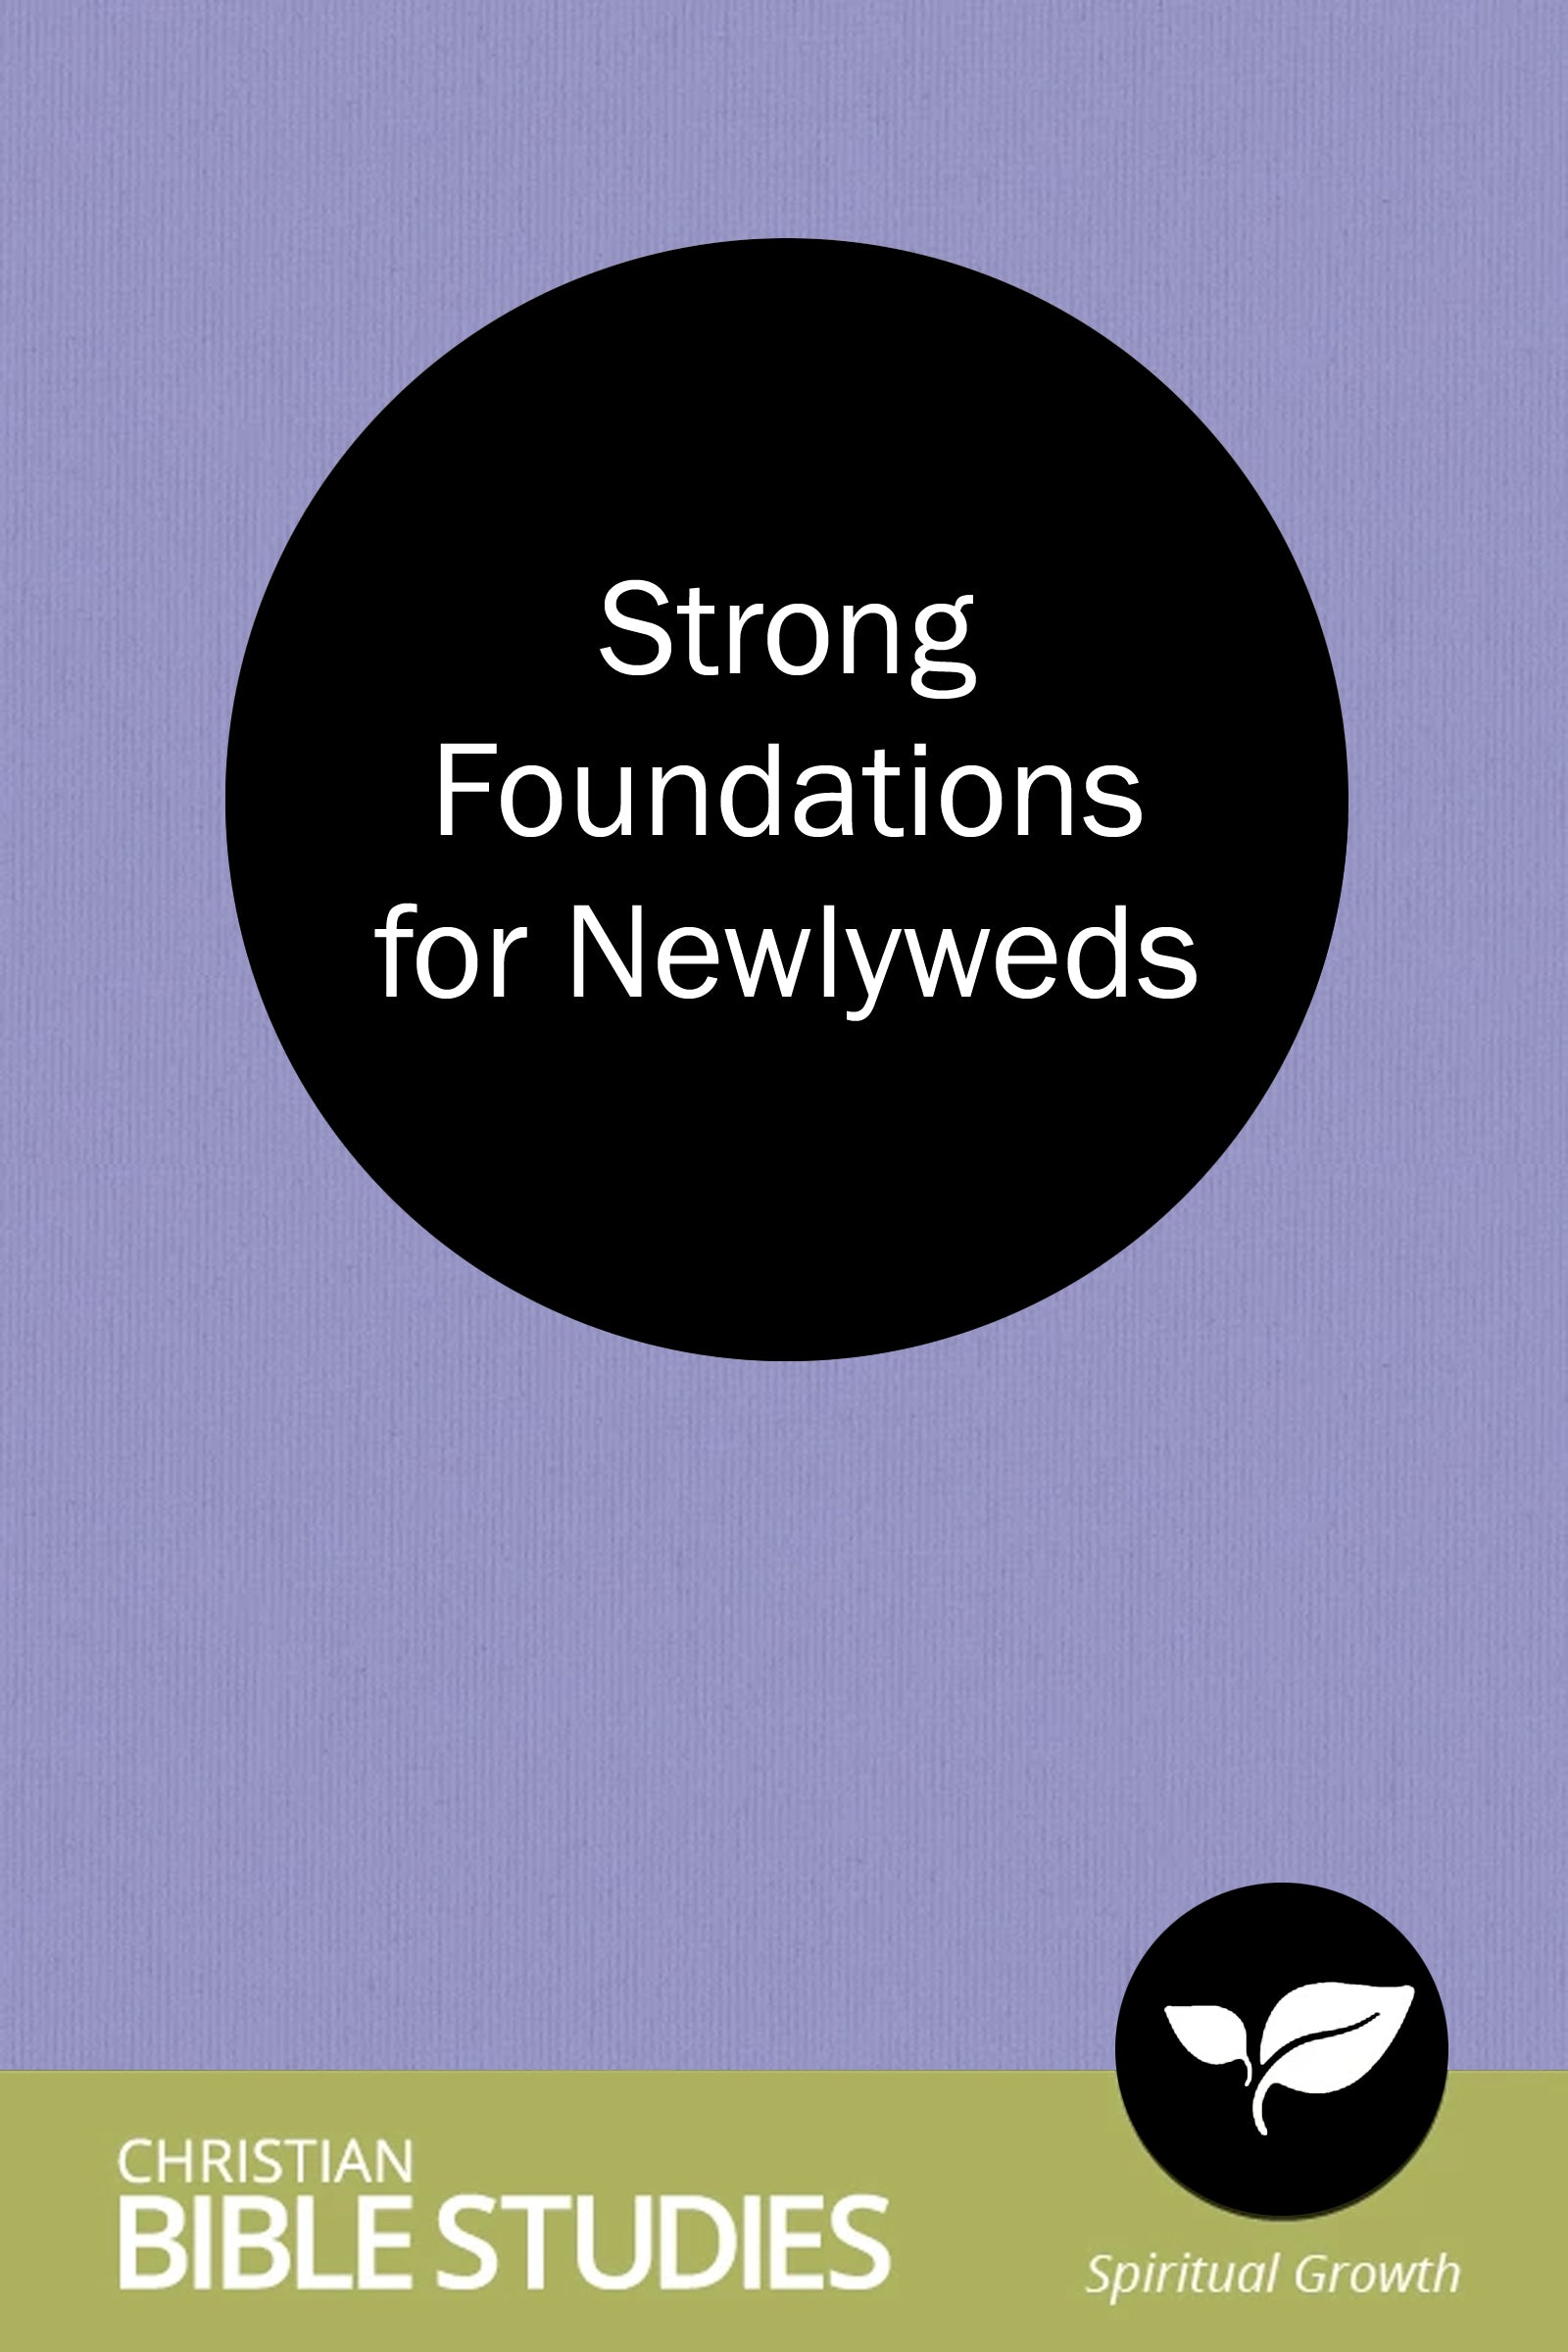 Strong Foundations for Newlyweds